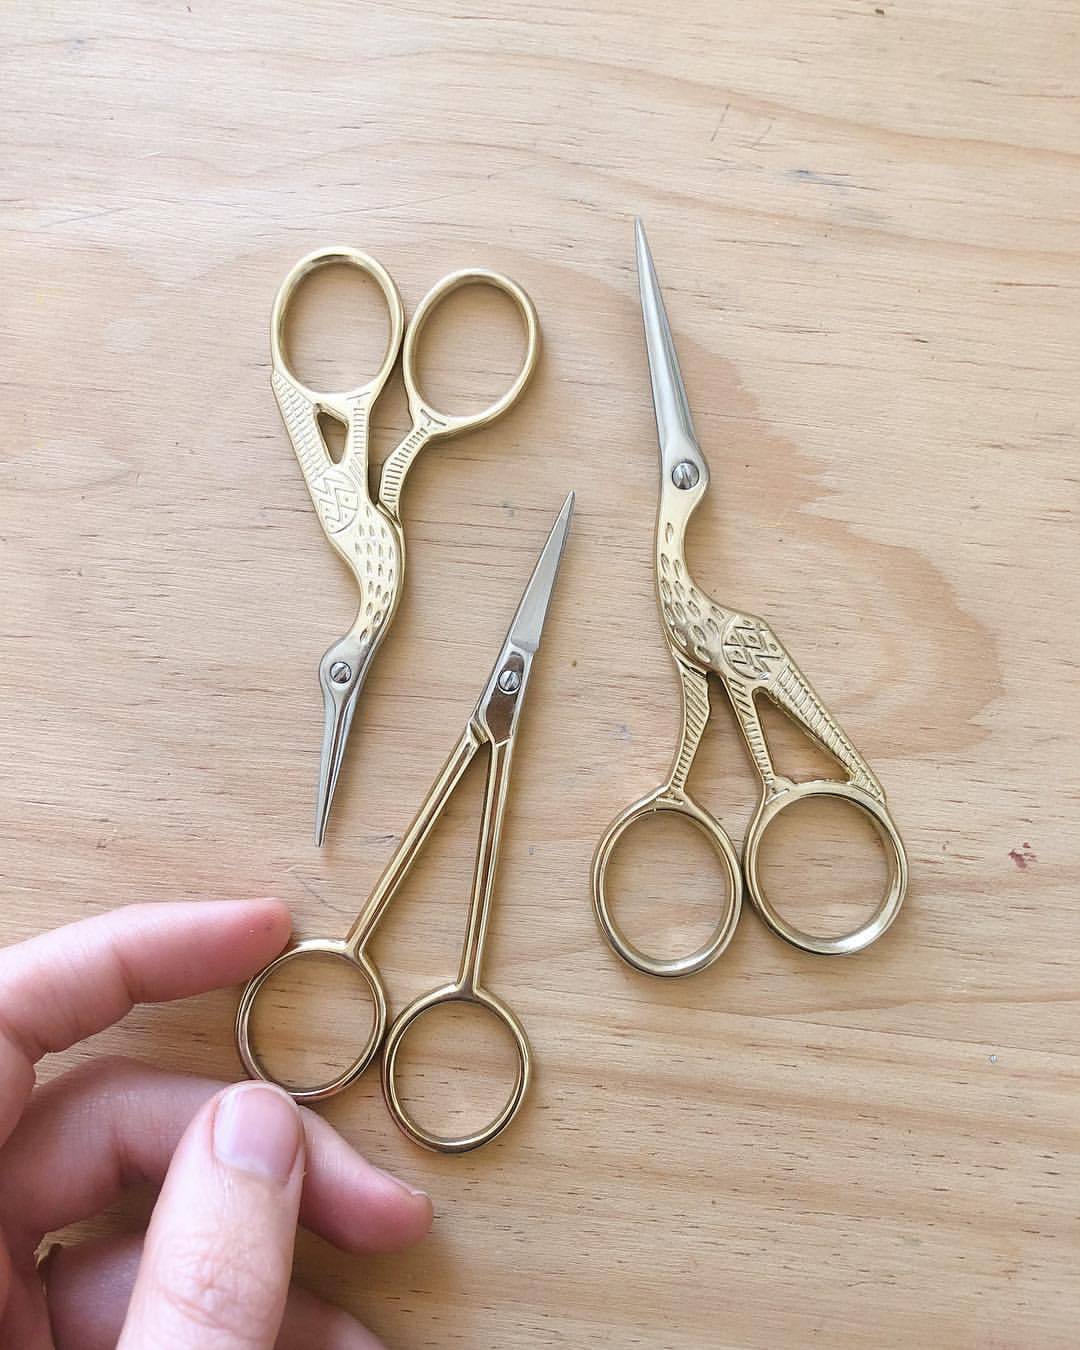 New babies for my collection. ✂️ (at Cape Town, Western Cape)
https://www.instagram.com/p/Bqor3YrBI64/?utm_source=ig_tumblr_share&igshid=5ybb0h0j2p6v